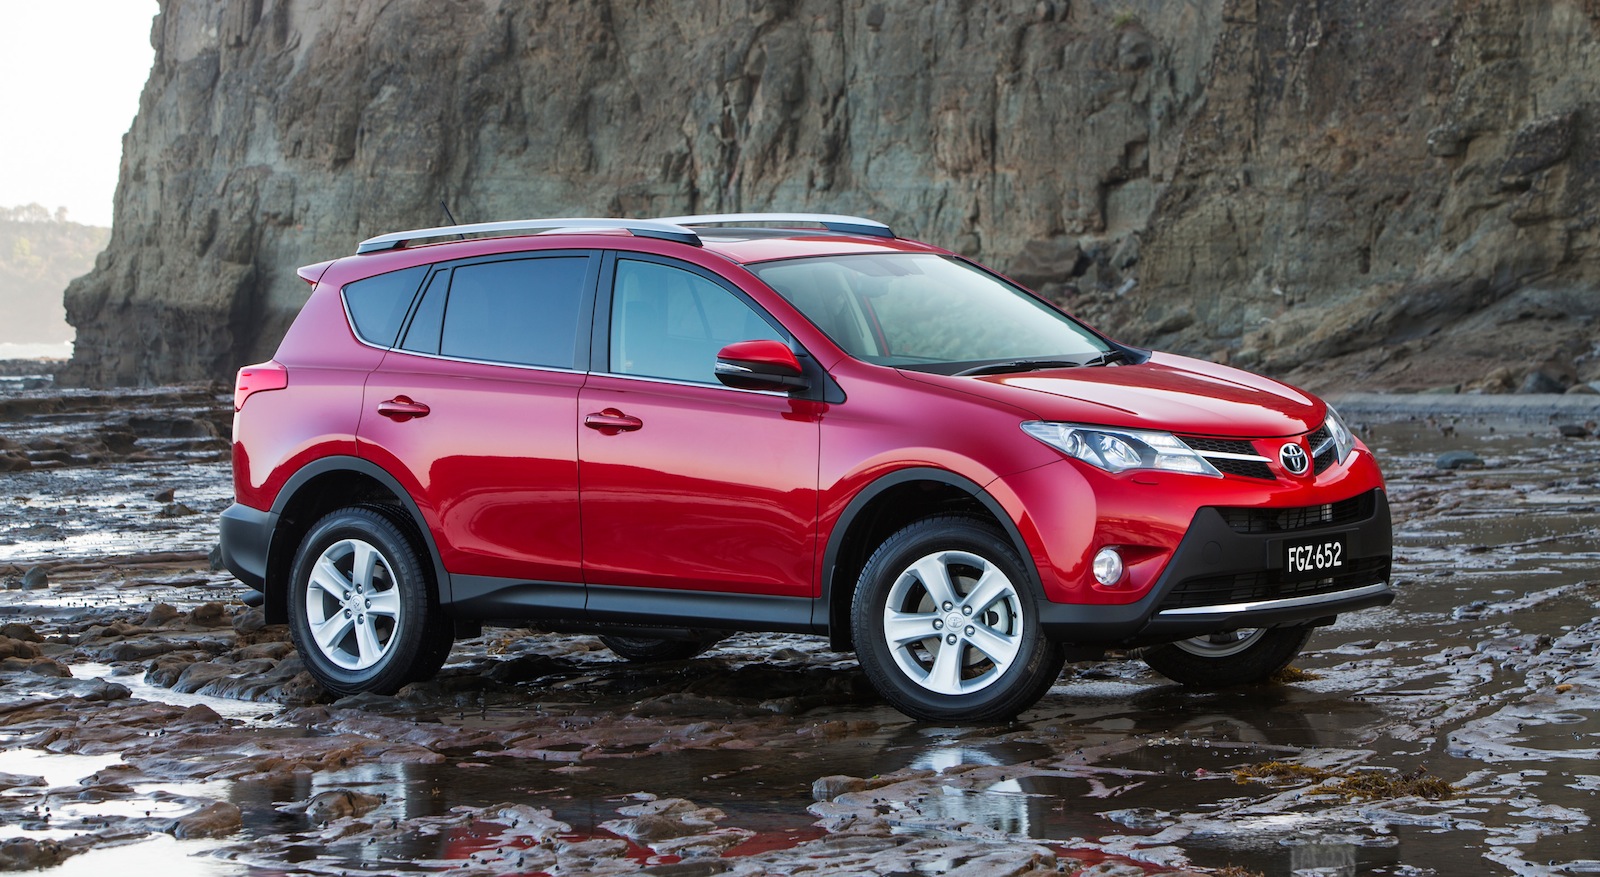 Toyota RAV4 diesel towing capacity doubled Photos (1 of 2)